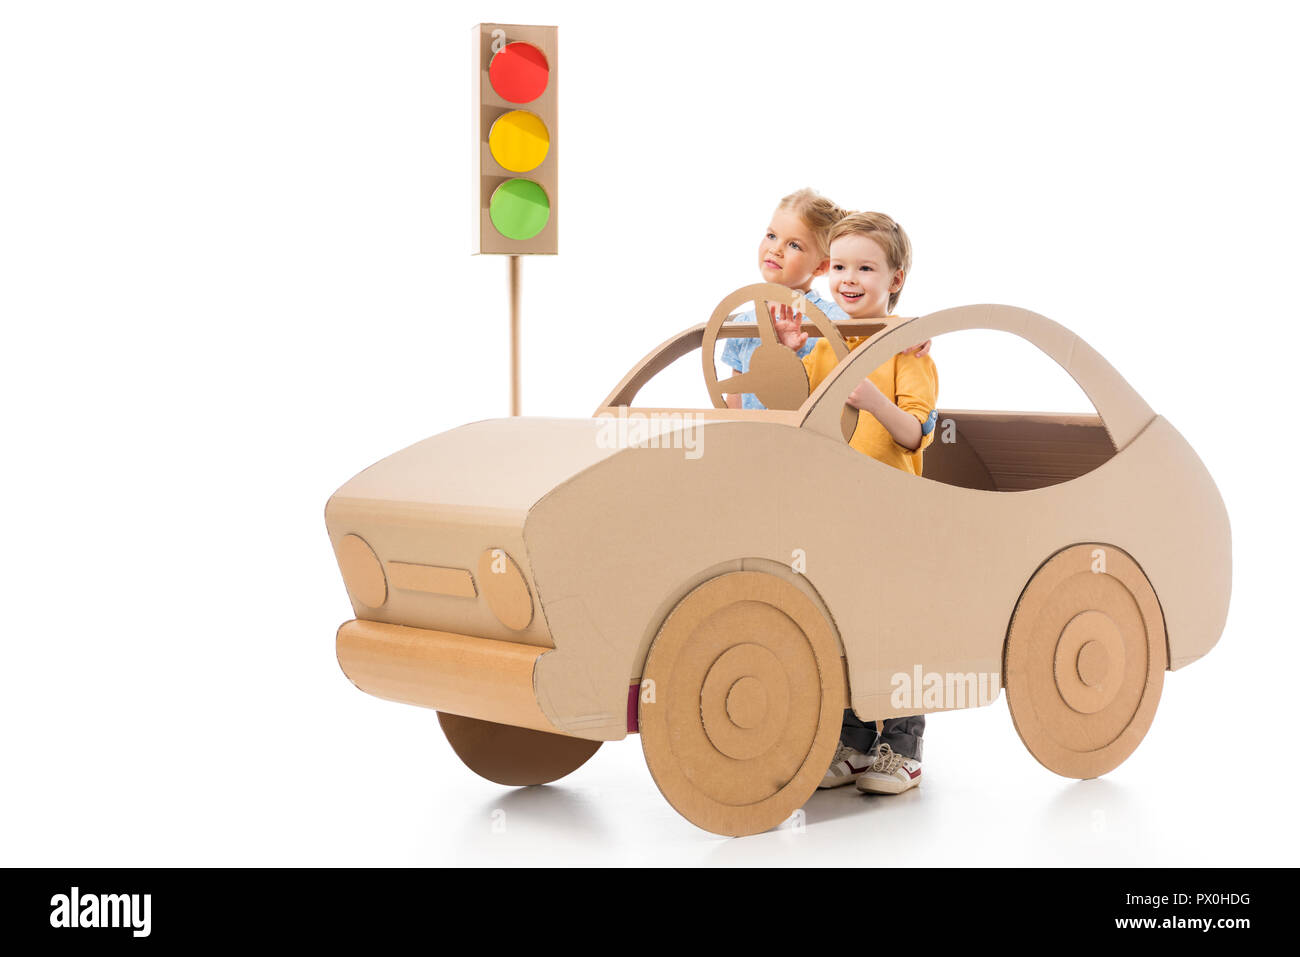 brother and sister playing with cardboard car and traffic lights, on white Stock Photo